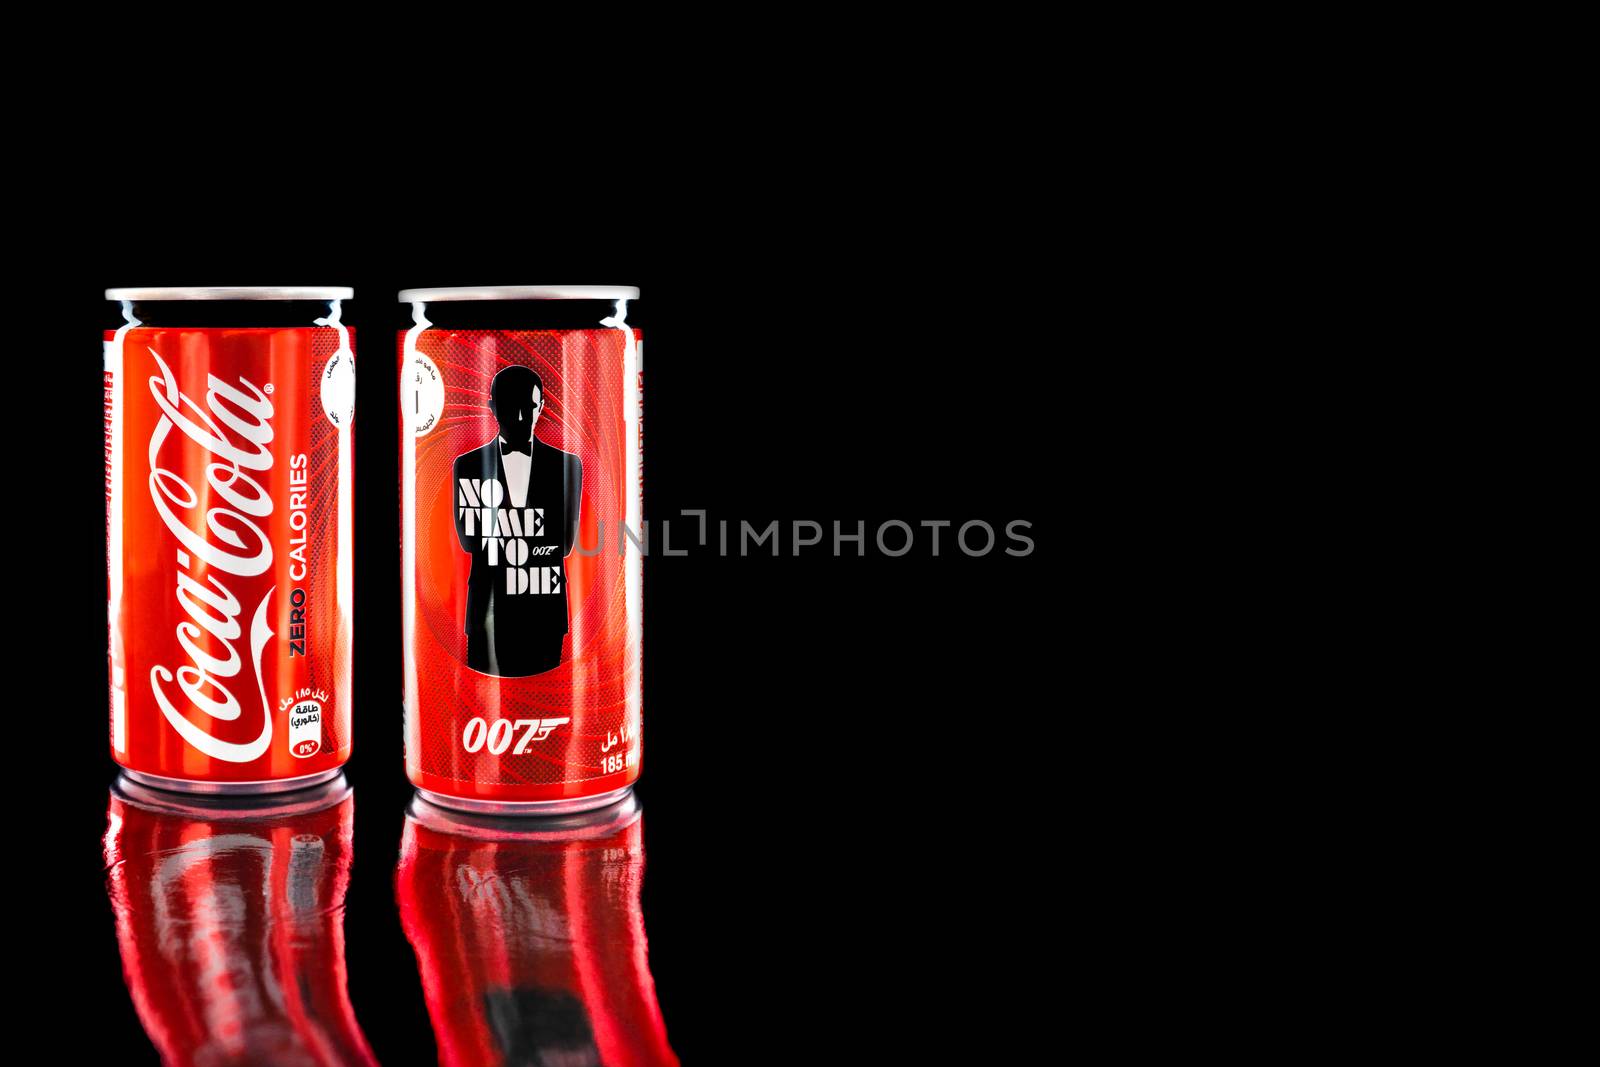 Cola cola or Coke drink on black background. Copy Space by silverwings